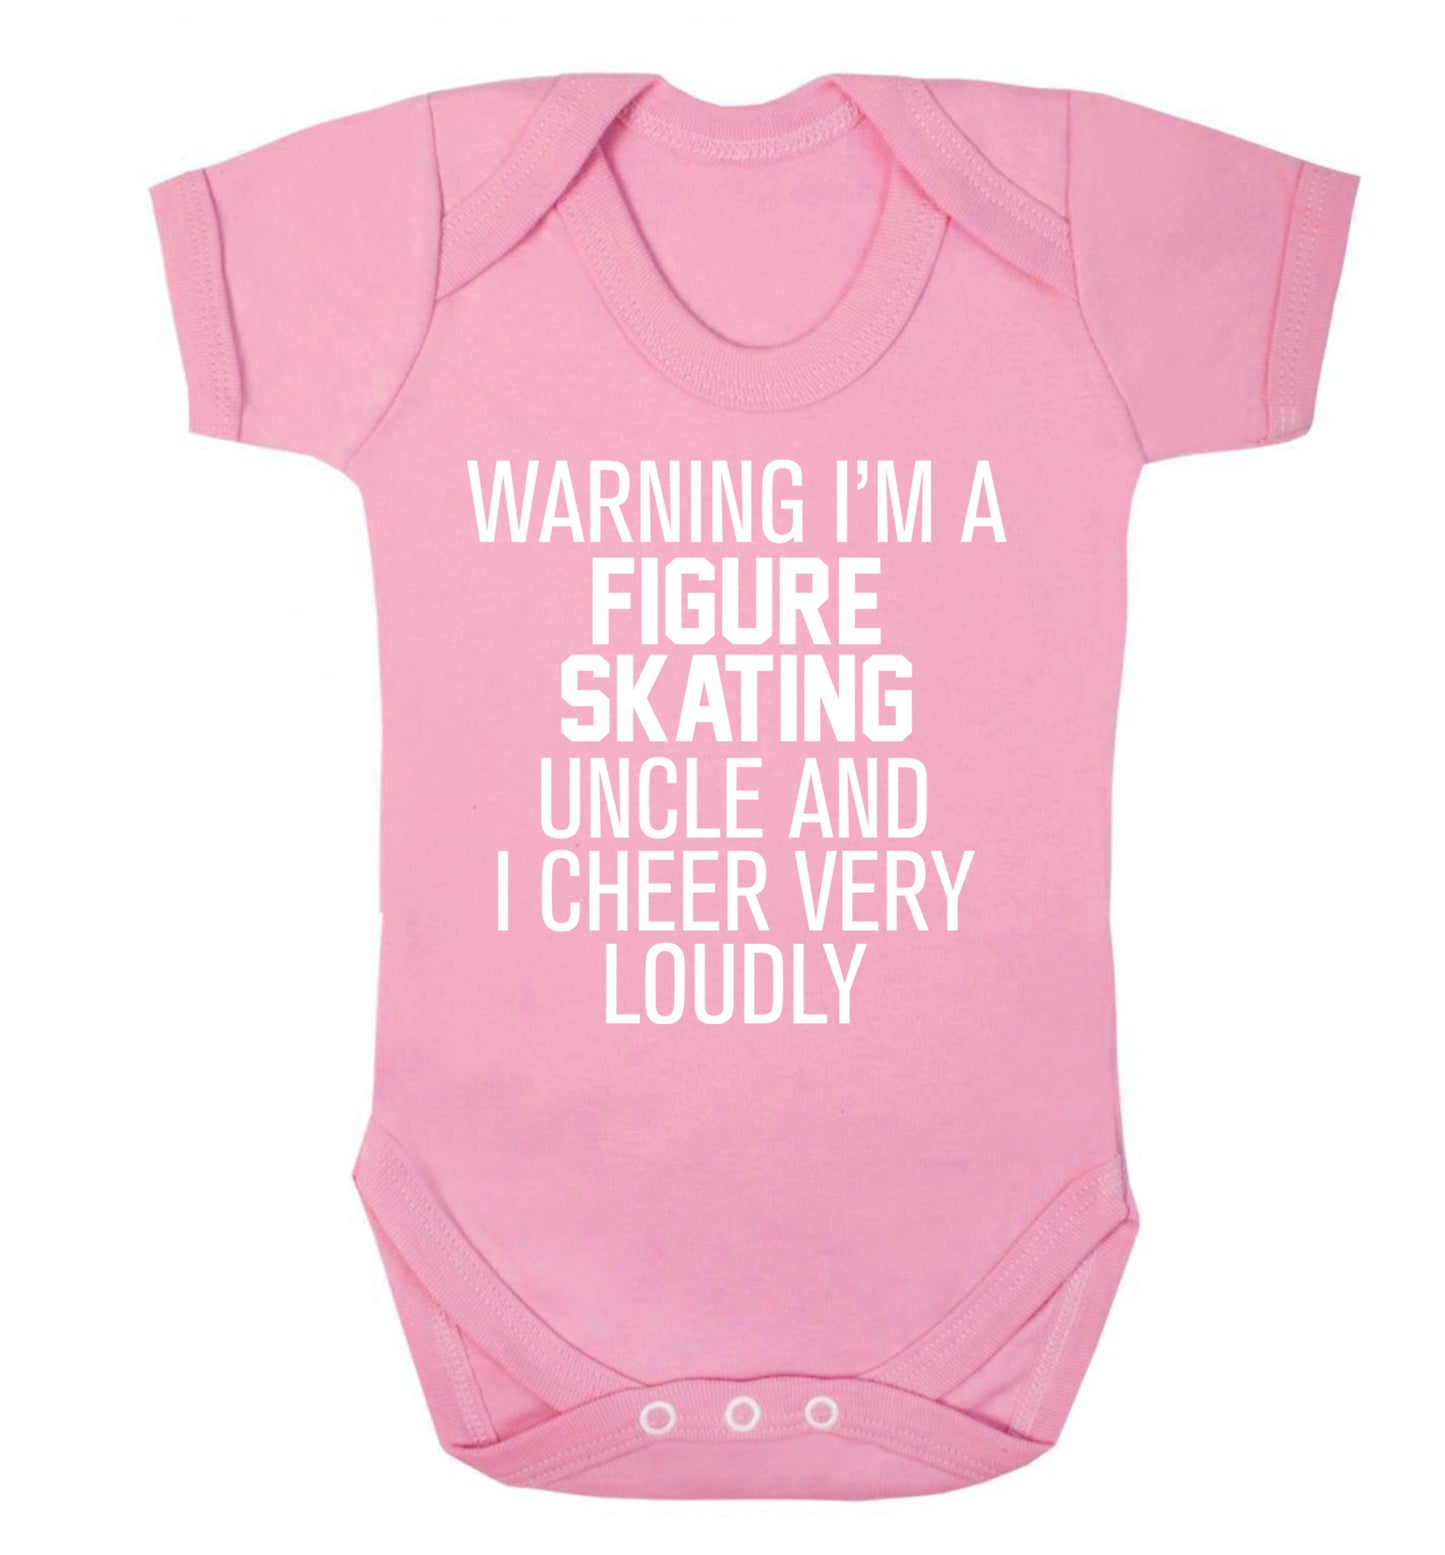 Warning I'm a figure skating uncle and I cheer very loudly Baby Vest pale pink 18-24 months